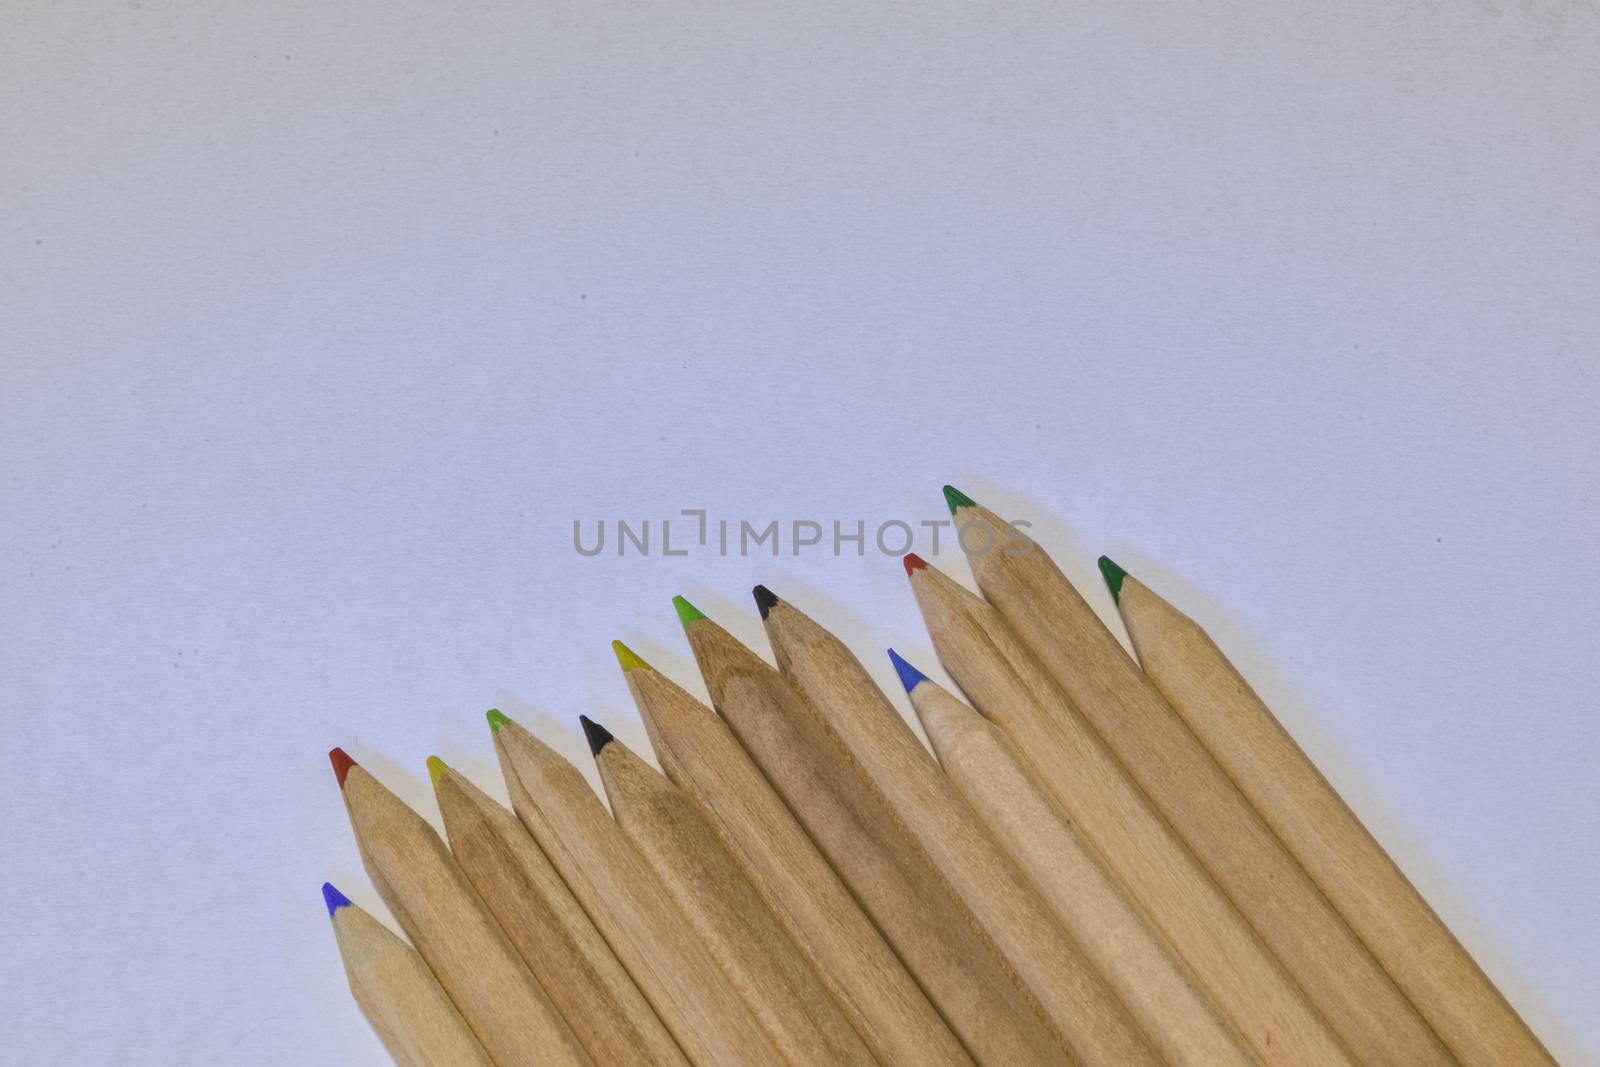 colored crayons lined up on a white pape , horizontal image by brambillasimone